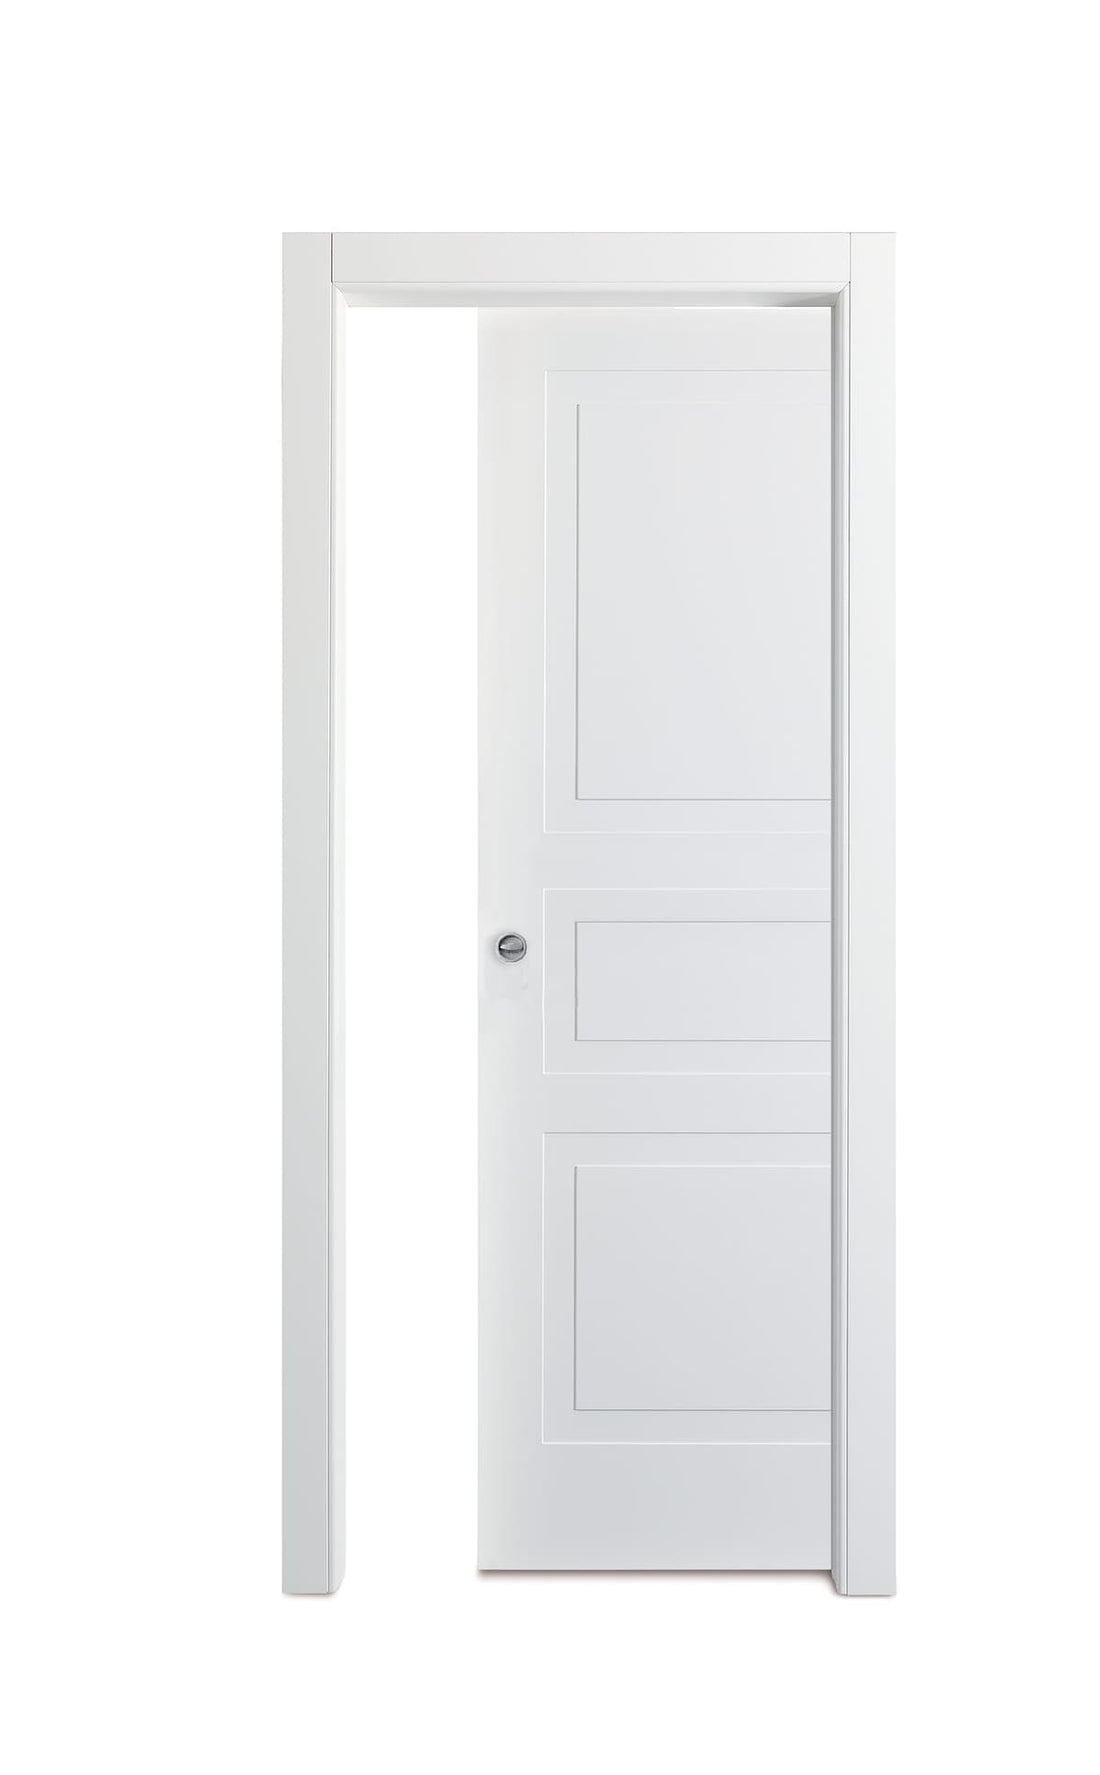 INTERIOR WALL SLIDING DOOR CLASS 210X80 WHITE LACQUERED - best price from Maltashopper.com BR450001219